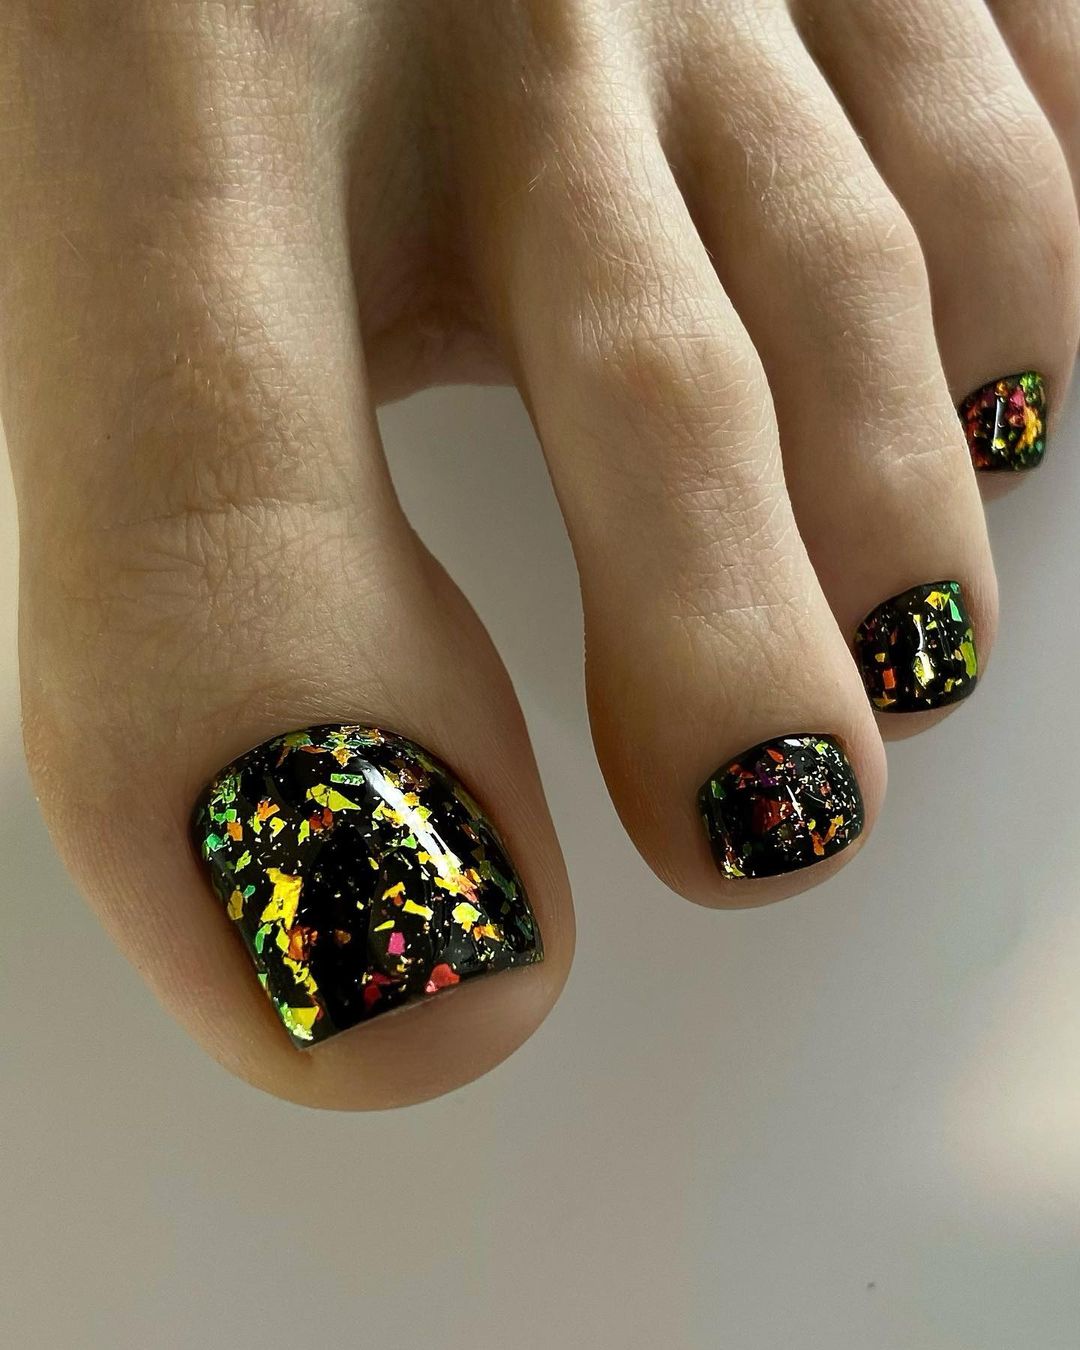 Black Toe Nails with Yellow Glitter Design